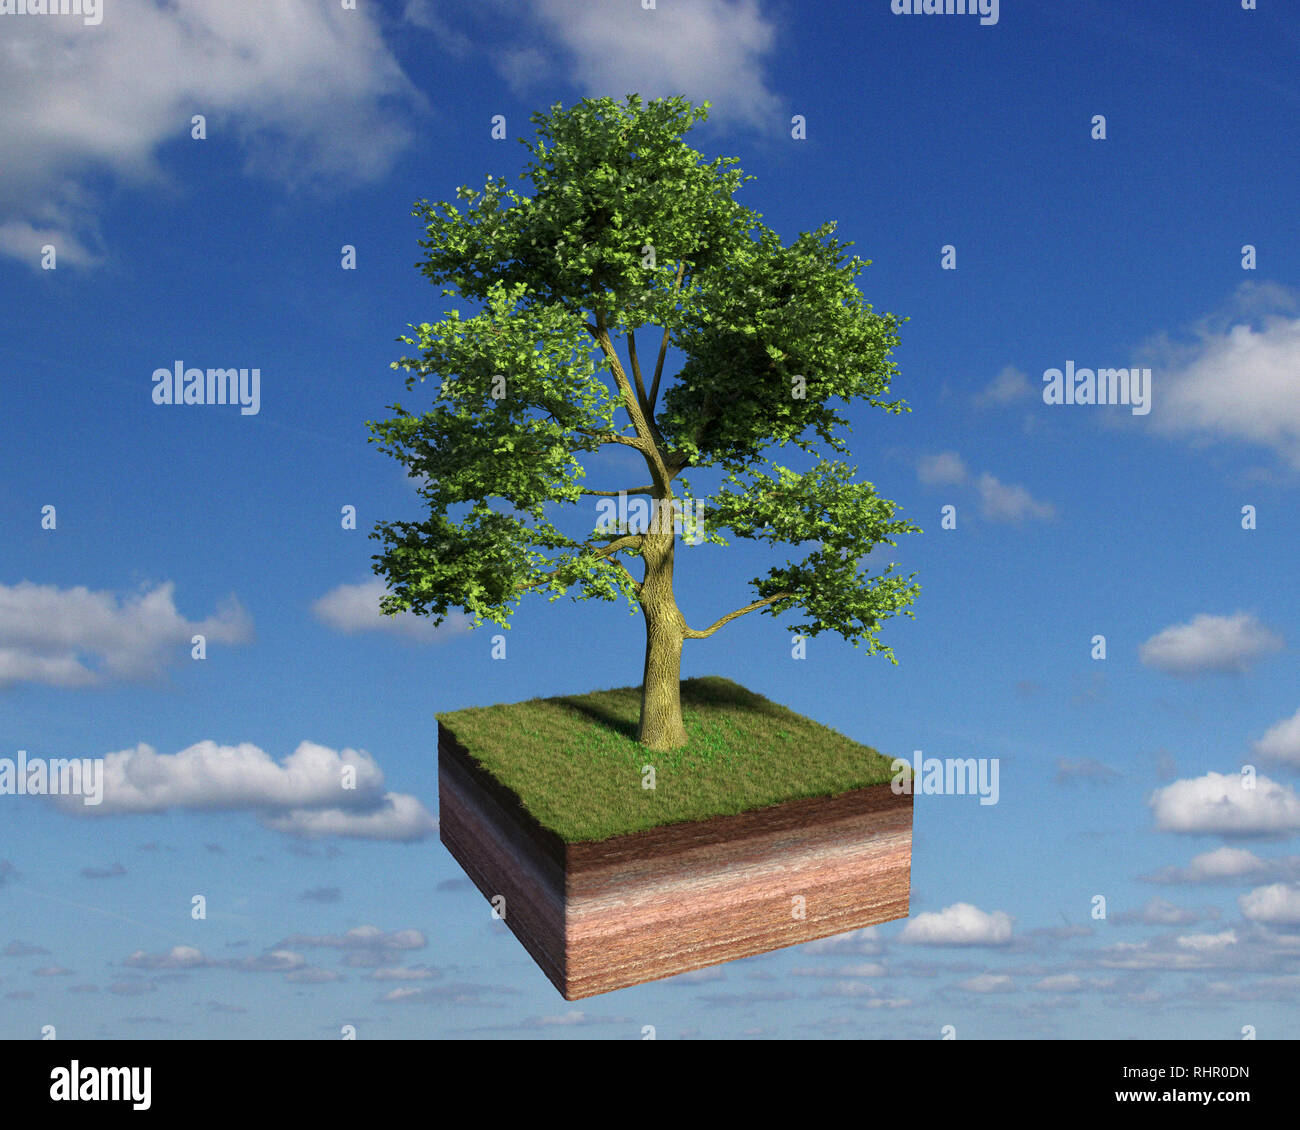 model of a cross section of ground with white ash tree tree and grass on the surface in front of blue sky with clouds Stock Photo